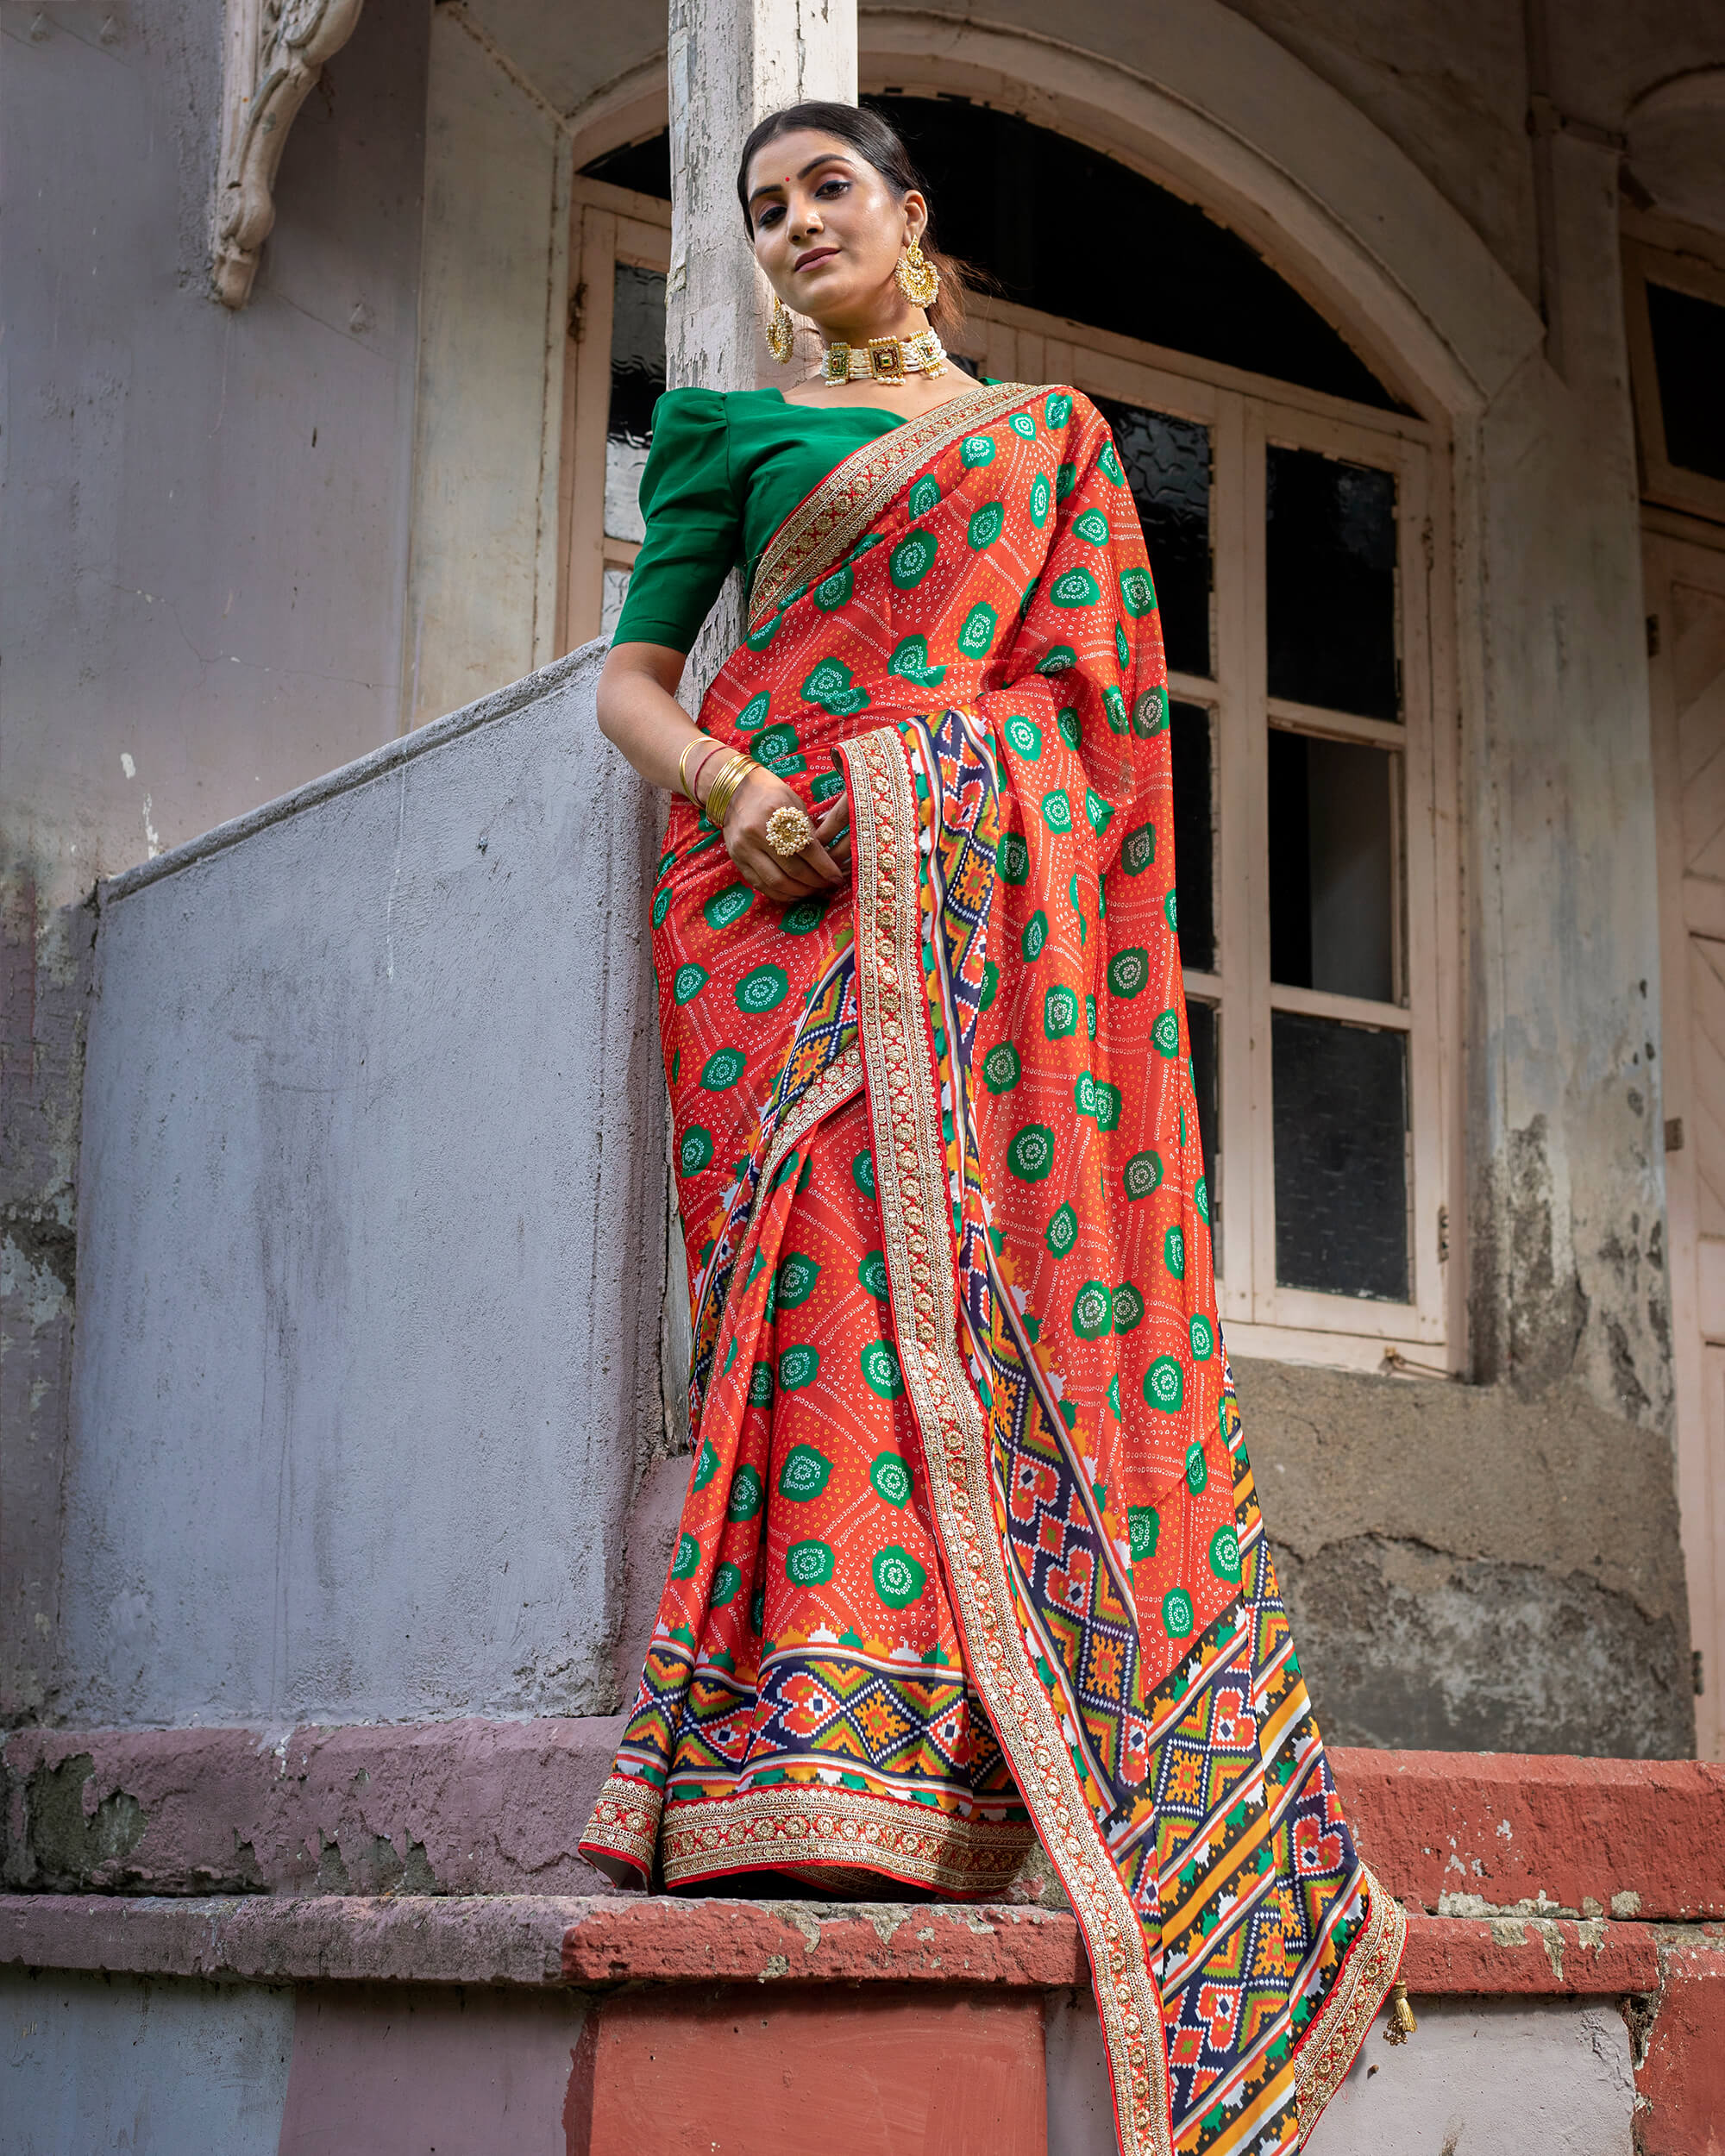 Georgette Silk Bandhej Saree With Patola Design Inspired Meenakari Motifs  and Stitched Blouse /georgette Bandhani Saree/bandhani Silk Saree - Etsy